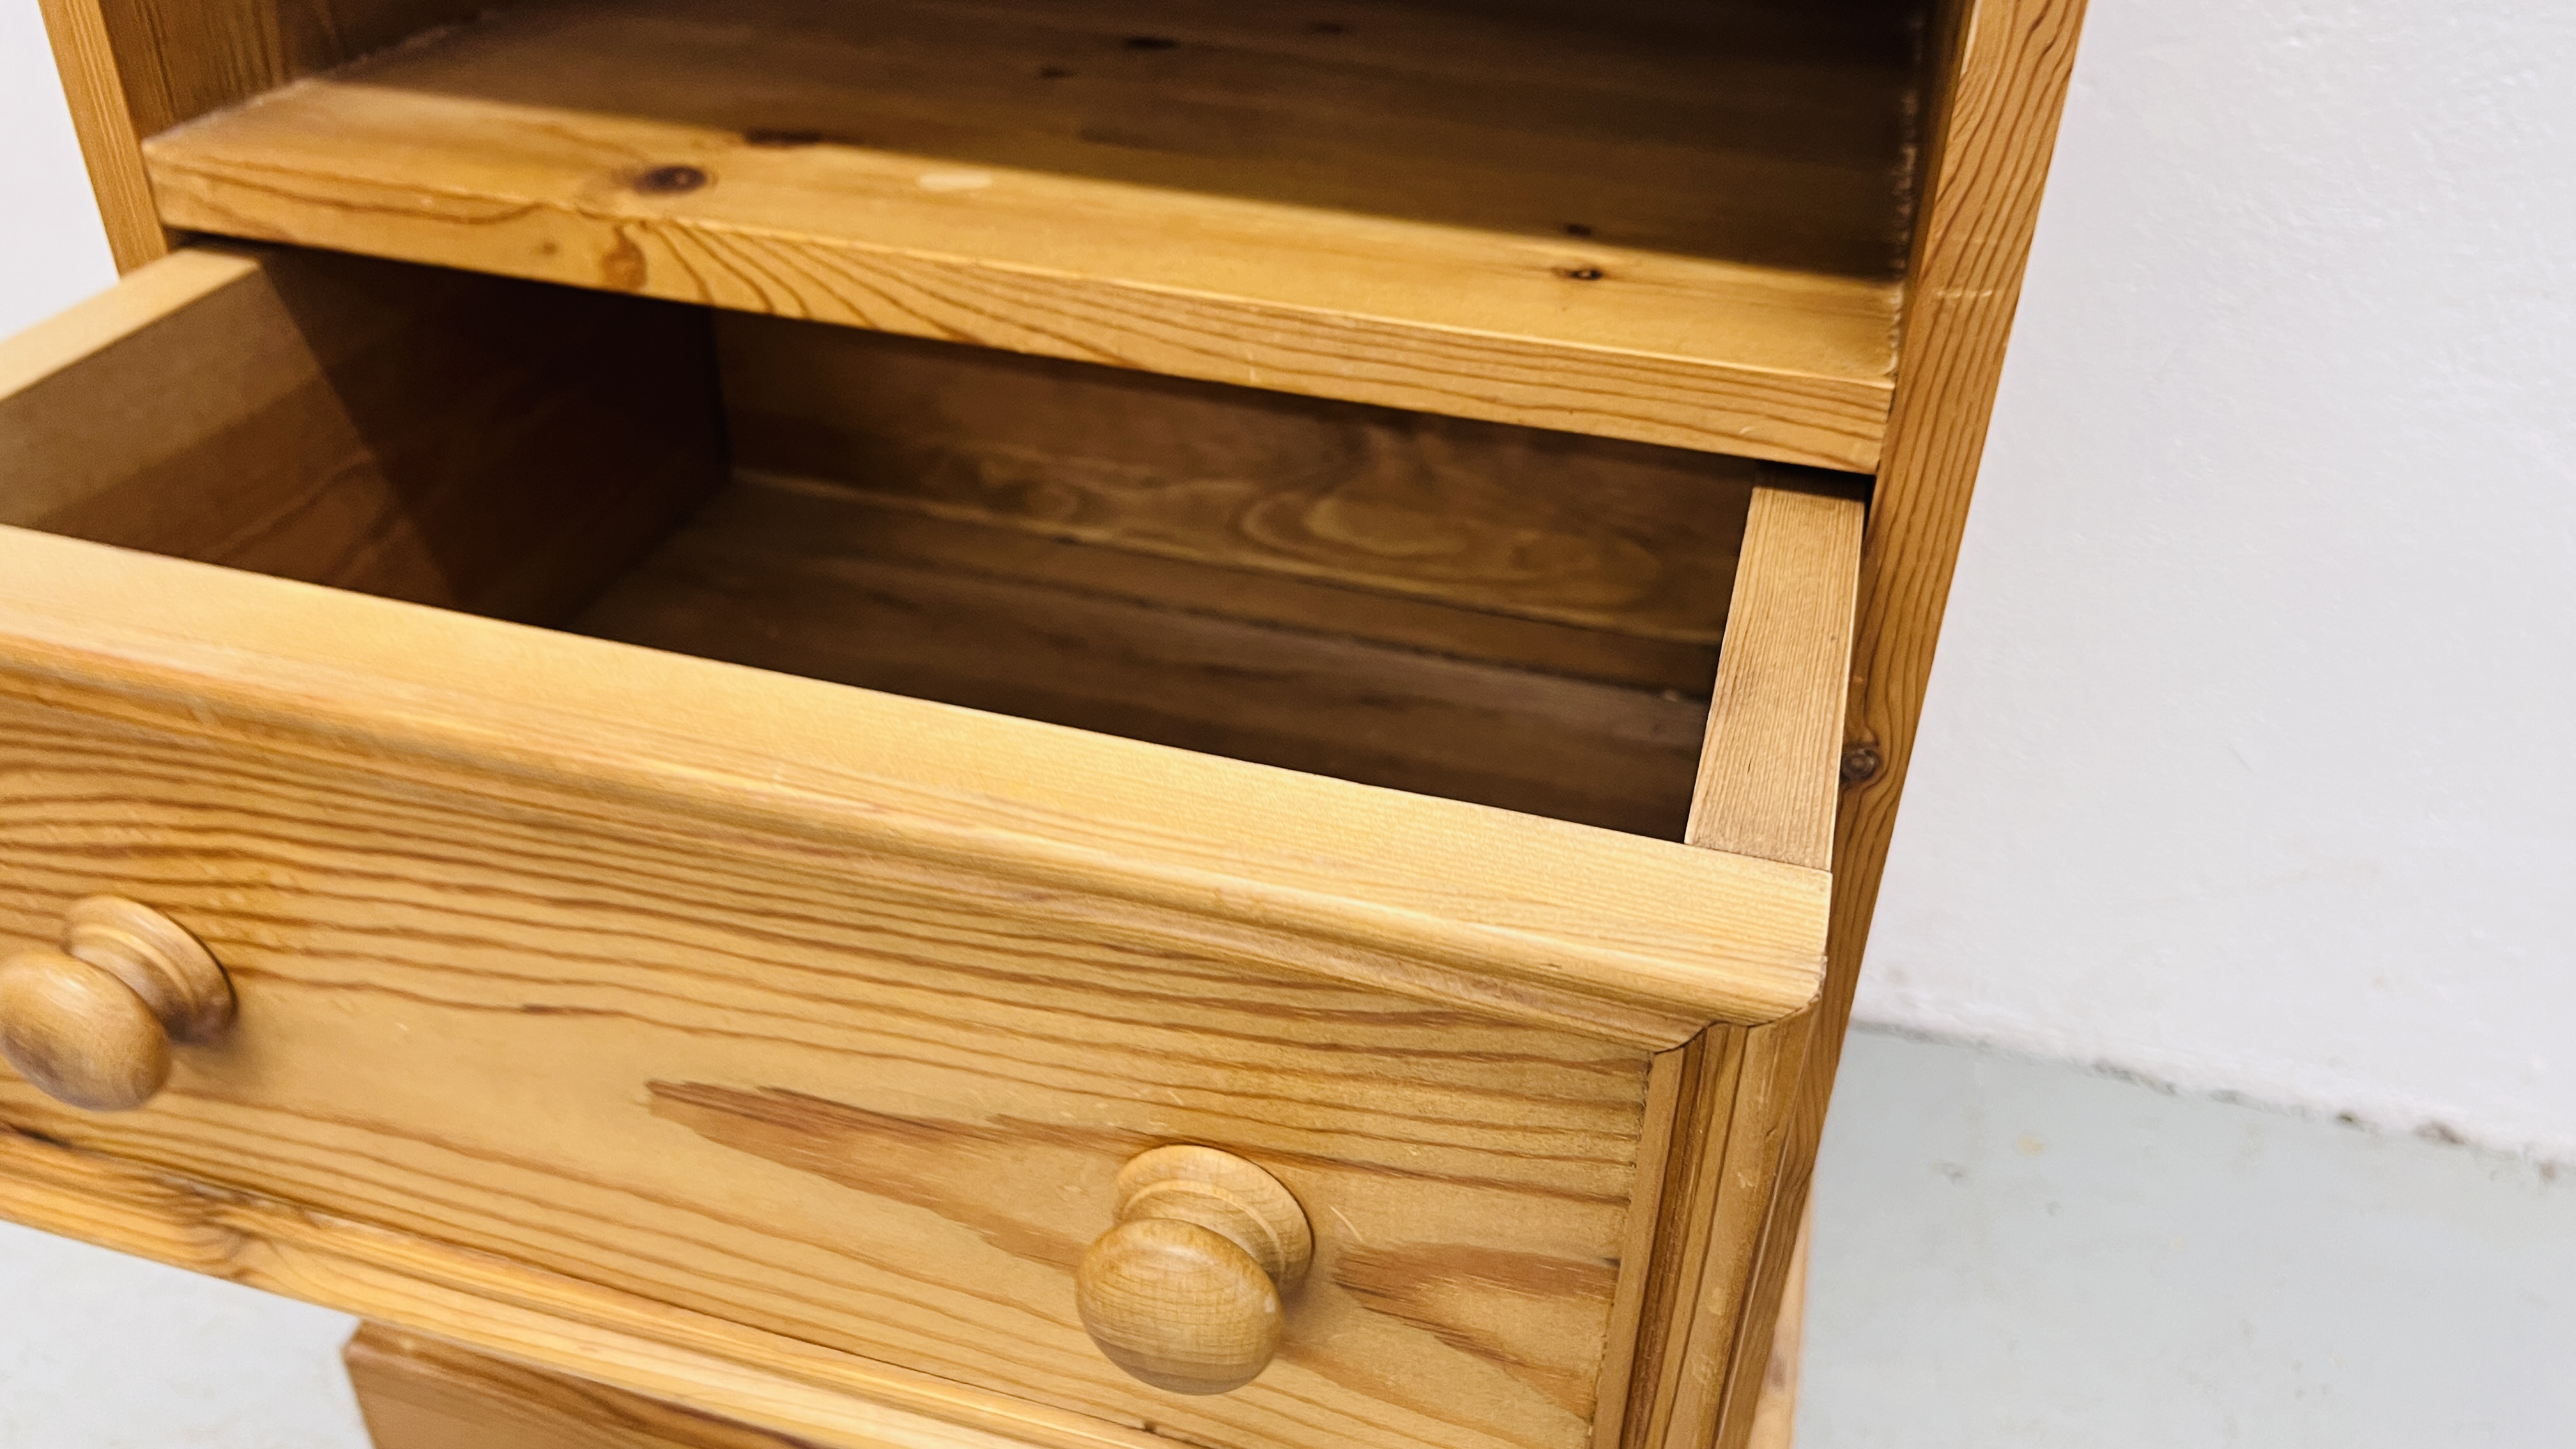 A WAXED PINE TWO DRAWER BEDSIDE CABINET WIDTH 45CM. DEPTH 38CM. HEIGHT 67CM. - Image 6 of 6